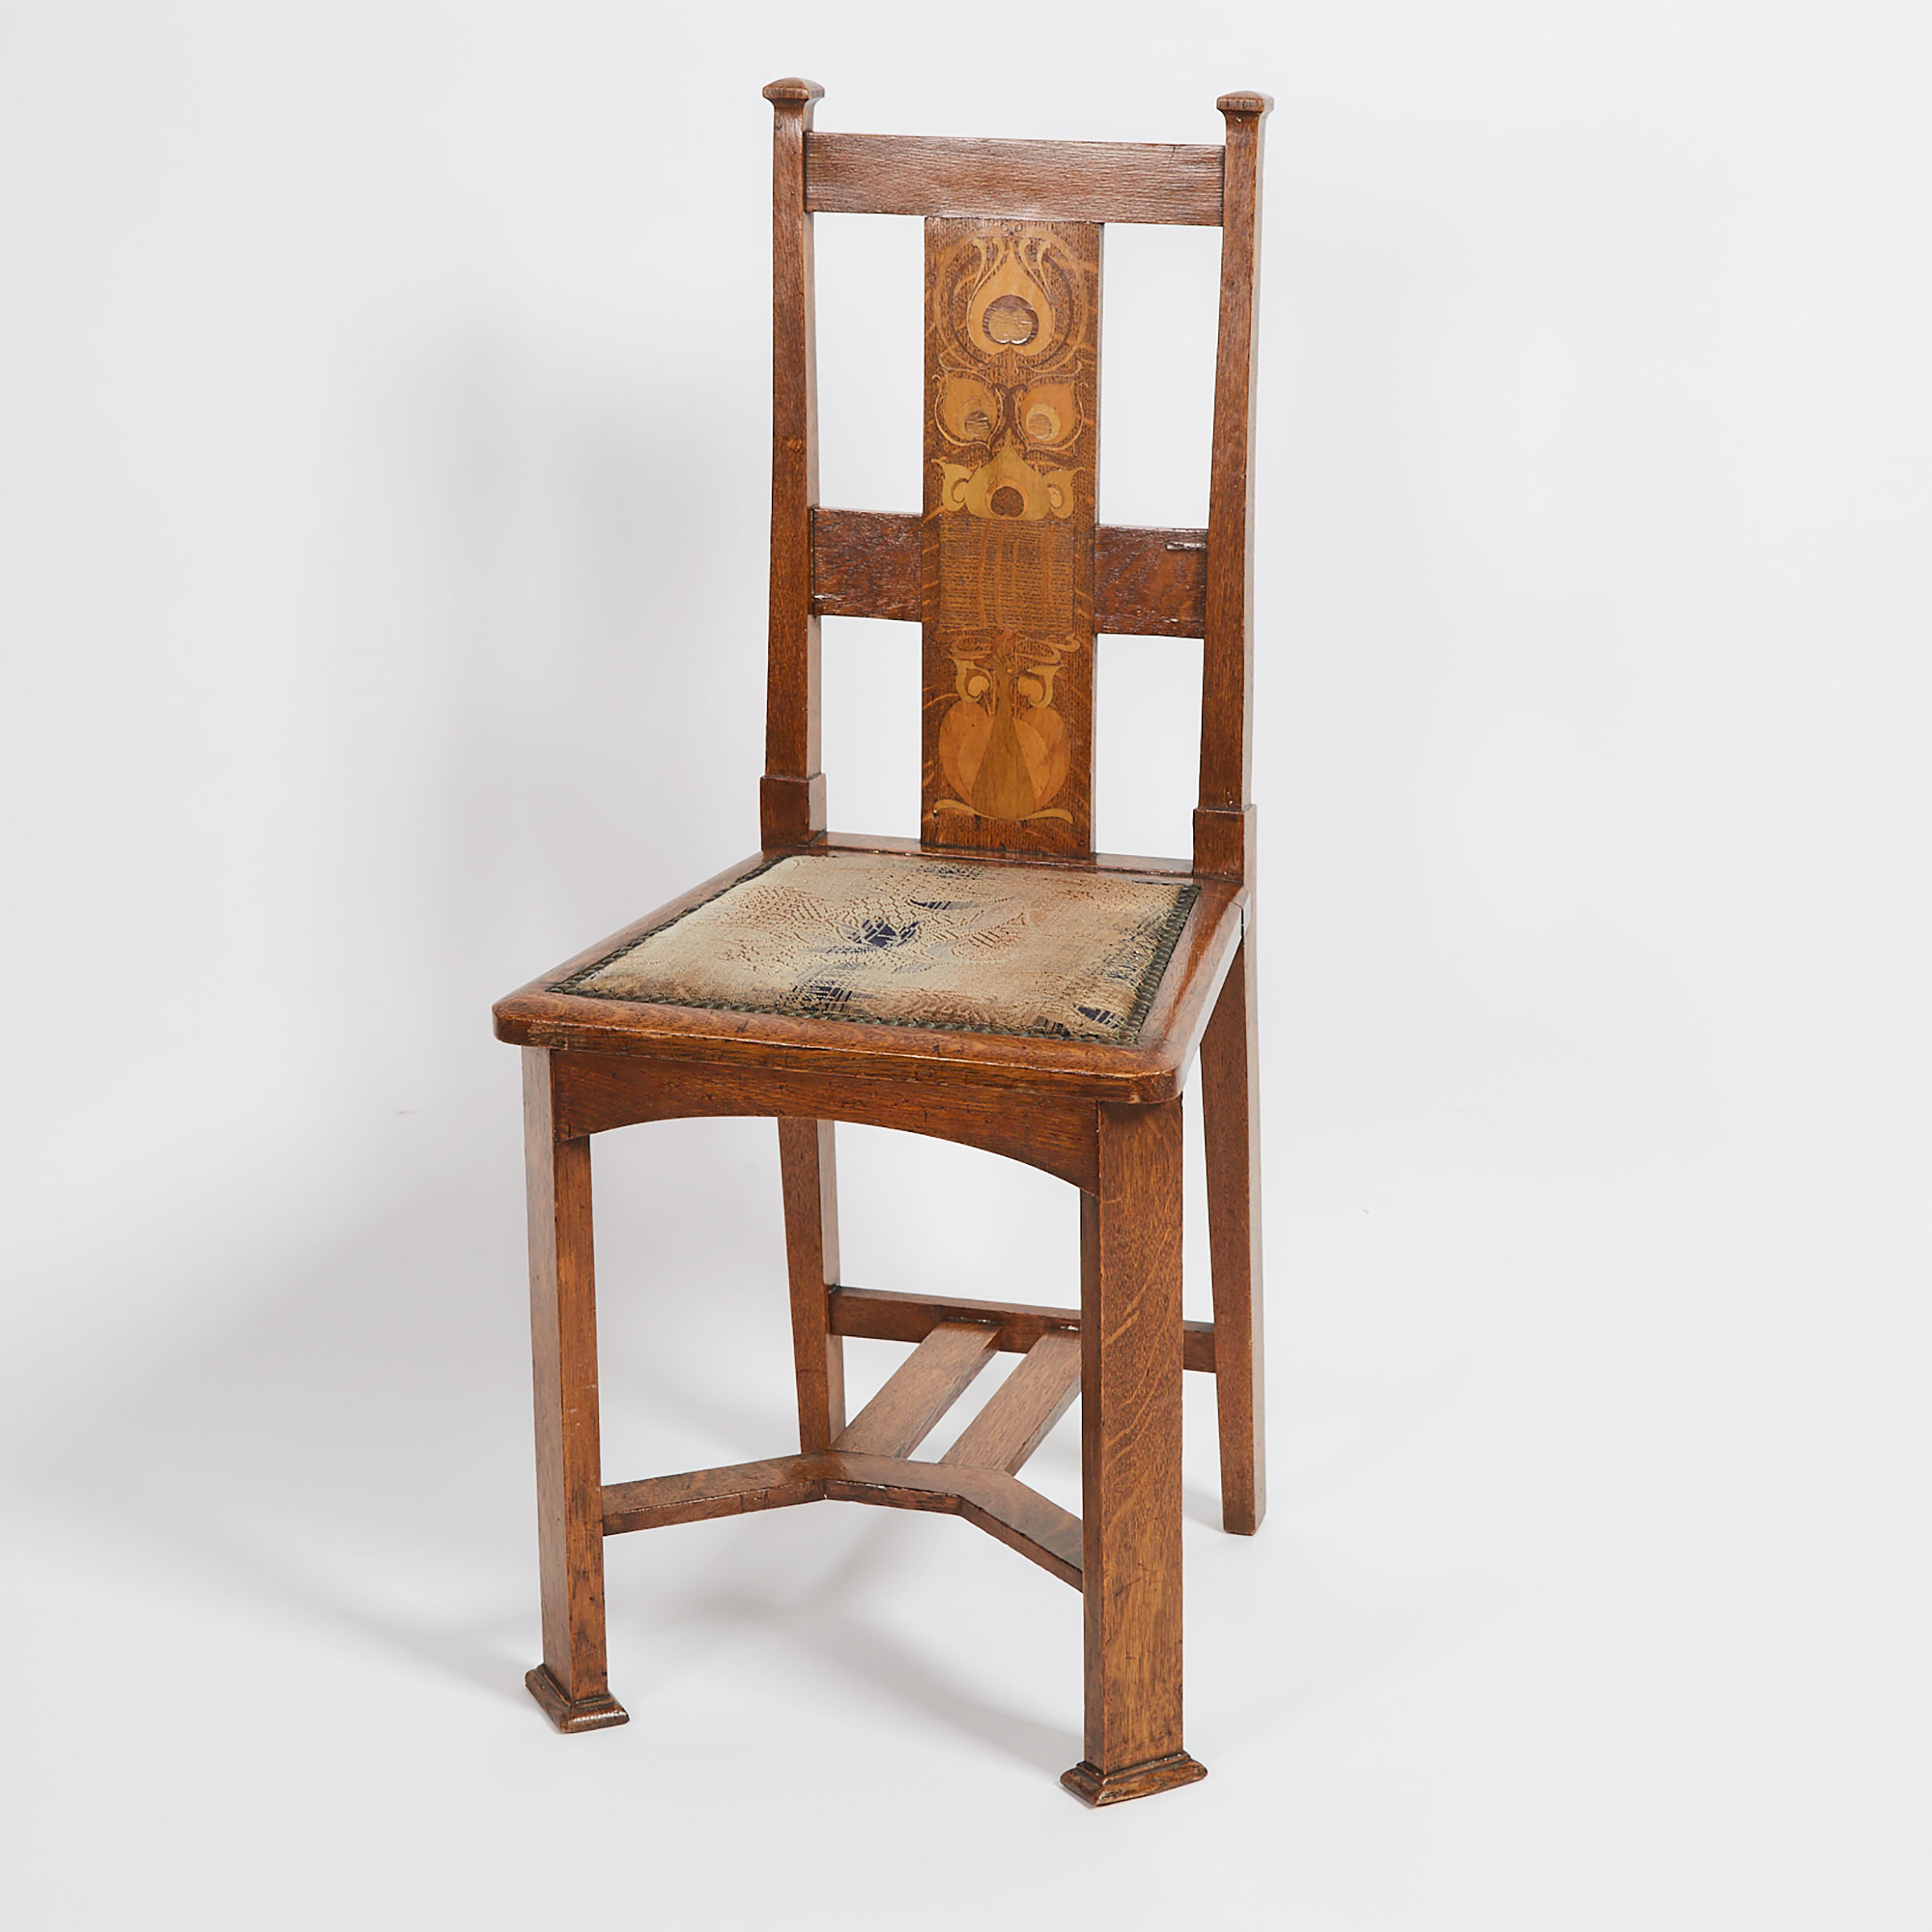 English Arts and Crafts Inlaid Oak Hall Chair, James Phillips and Sons Ltd., Bristol, c.1900